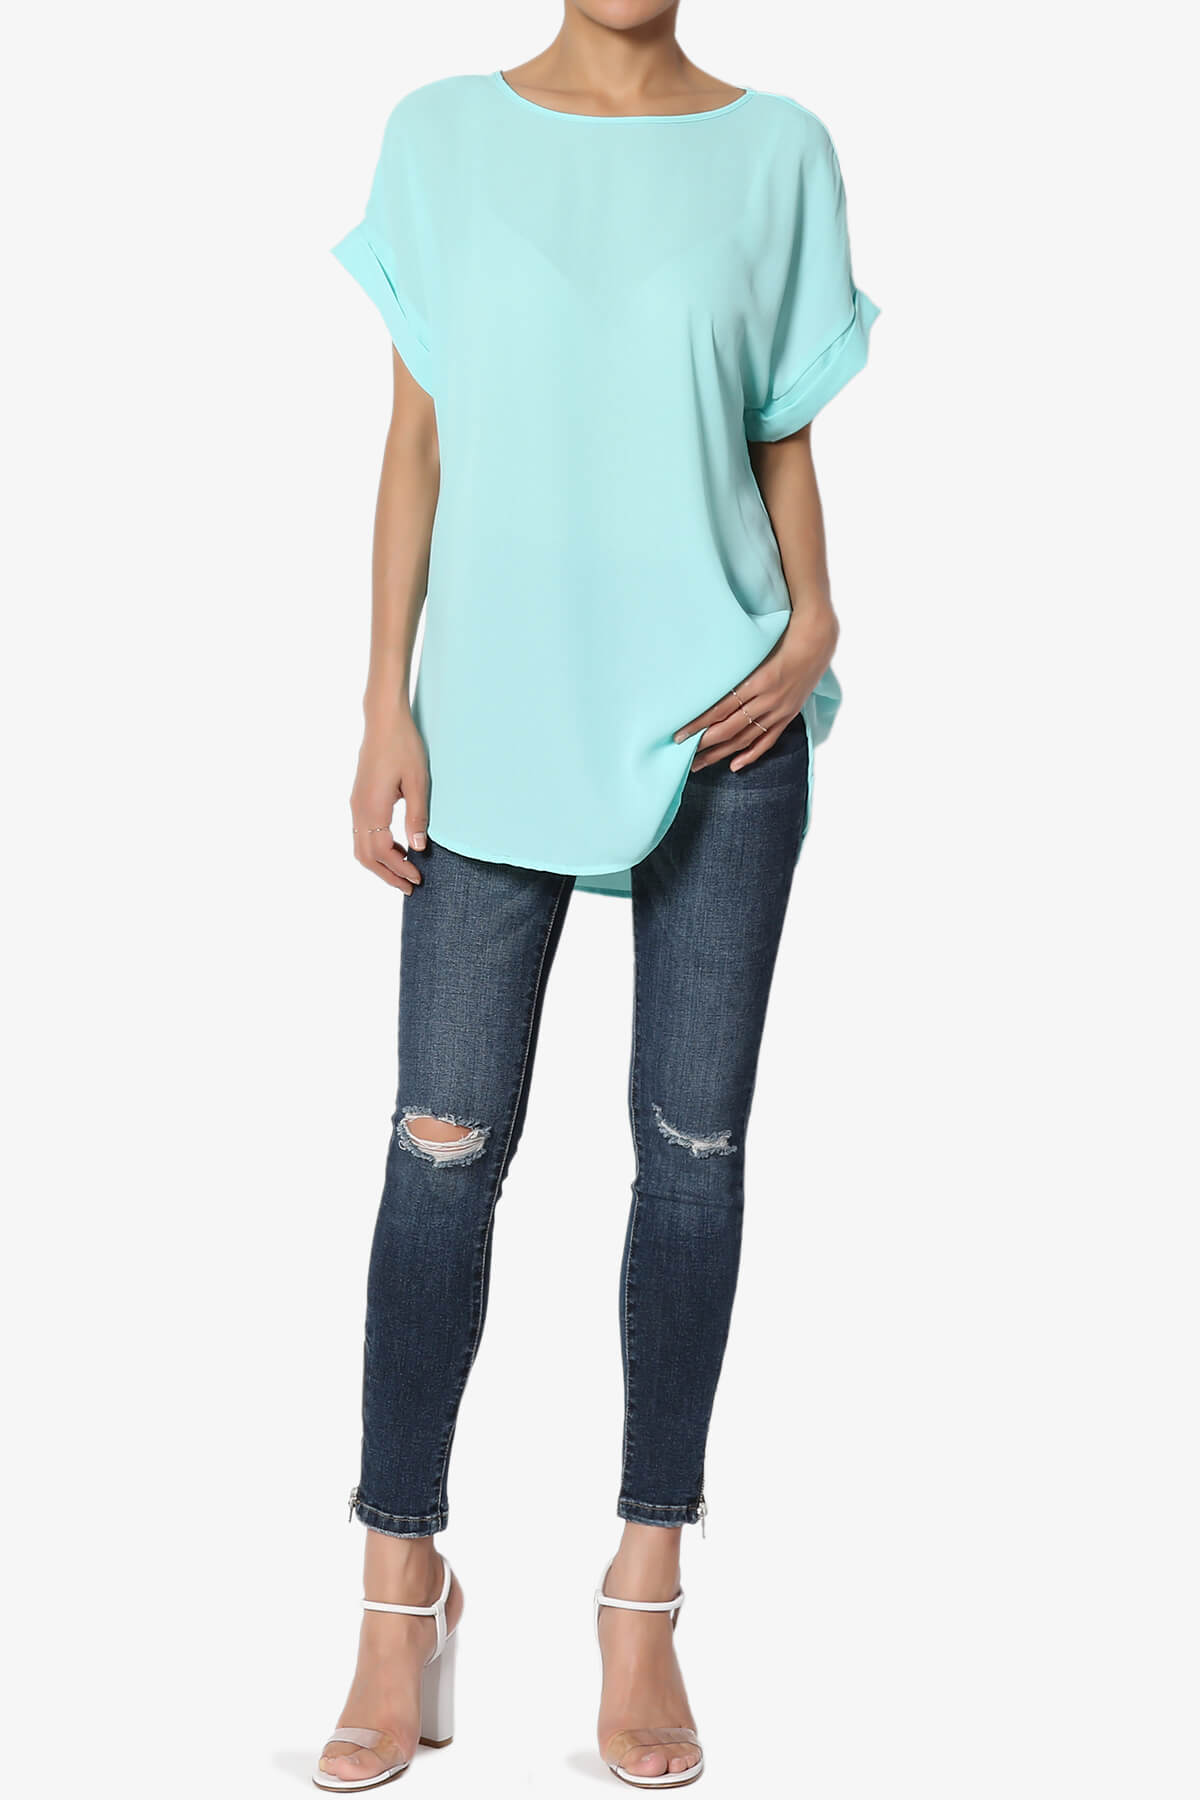 Load image into Gallery viewer, Juliette Boat Neck Chiffon Top BLUE MINT_6
